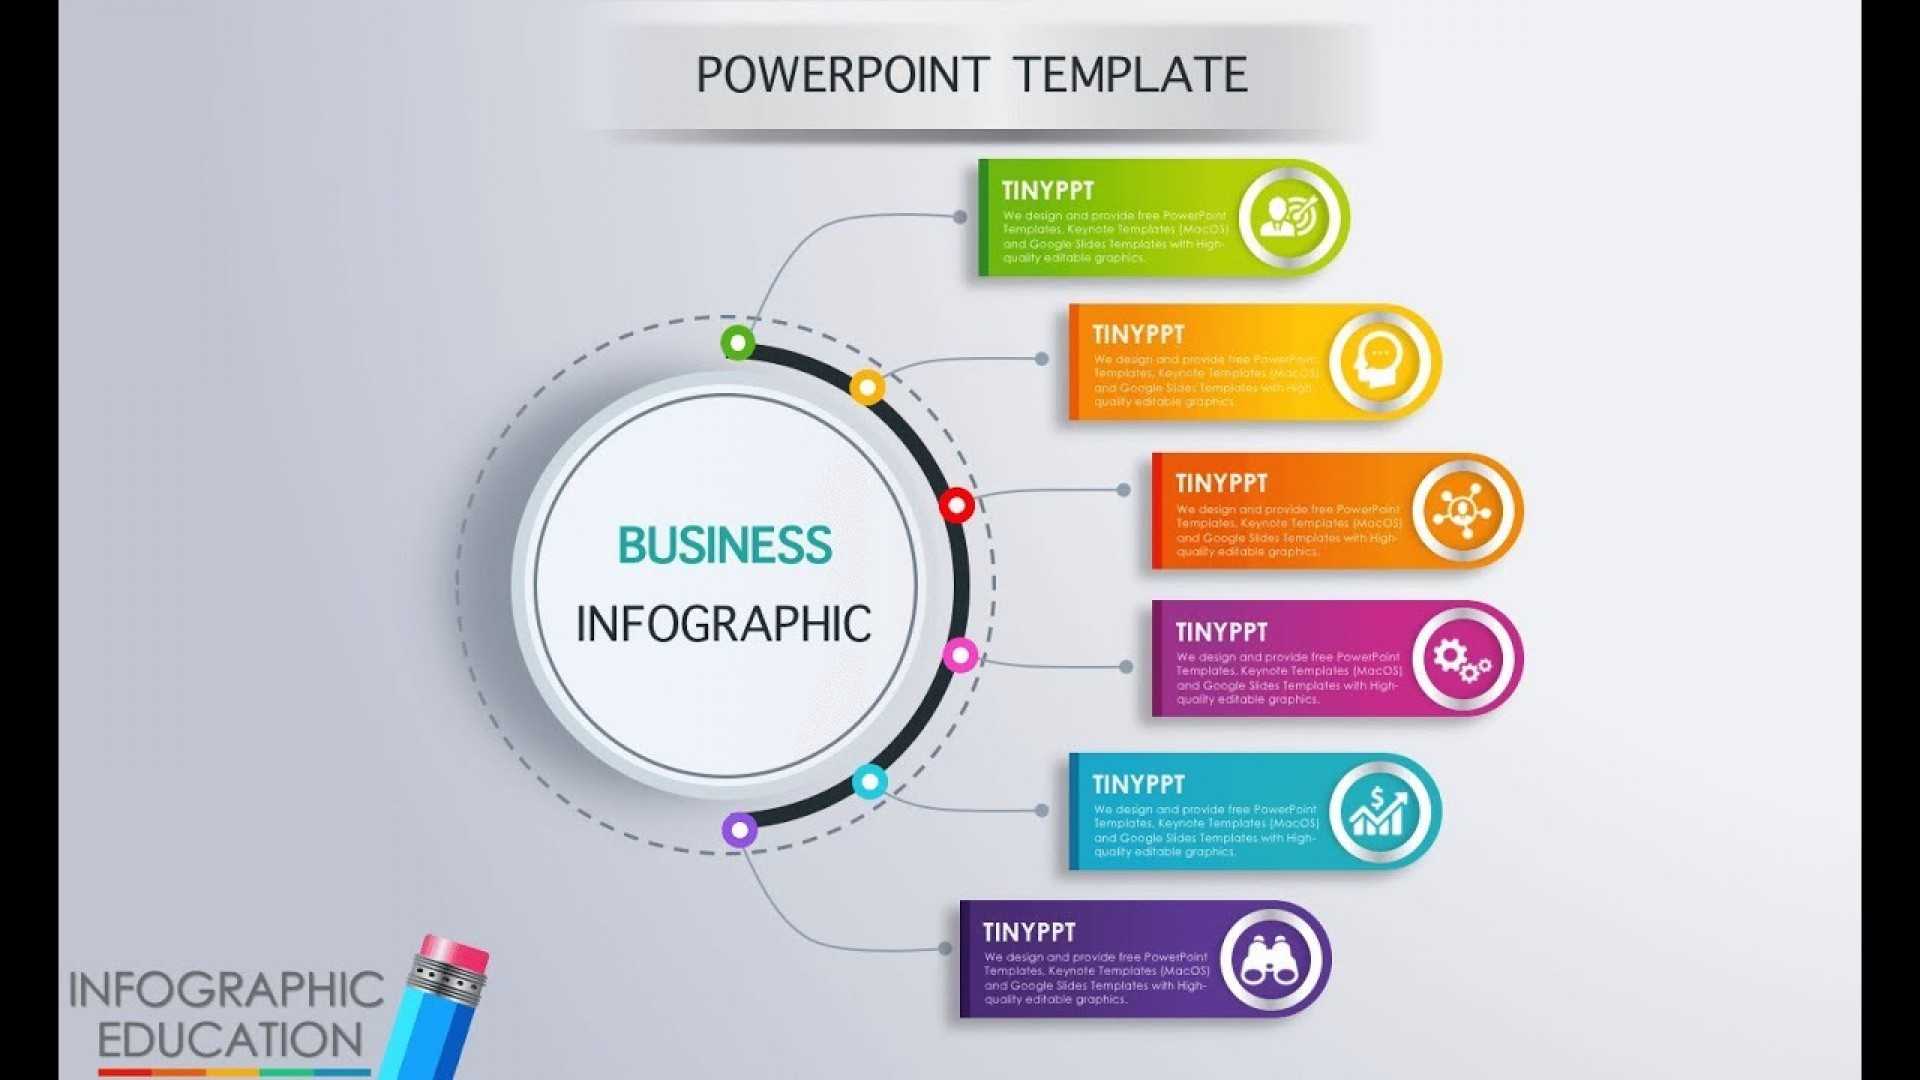 024 Animated Powerpoint Template Free Download Ideas With Powerpoint 2007 Template Free Download